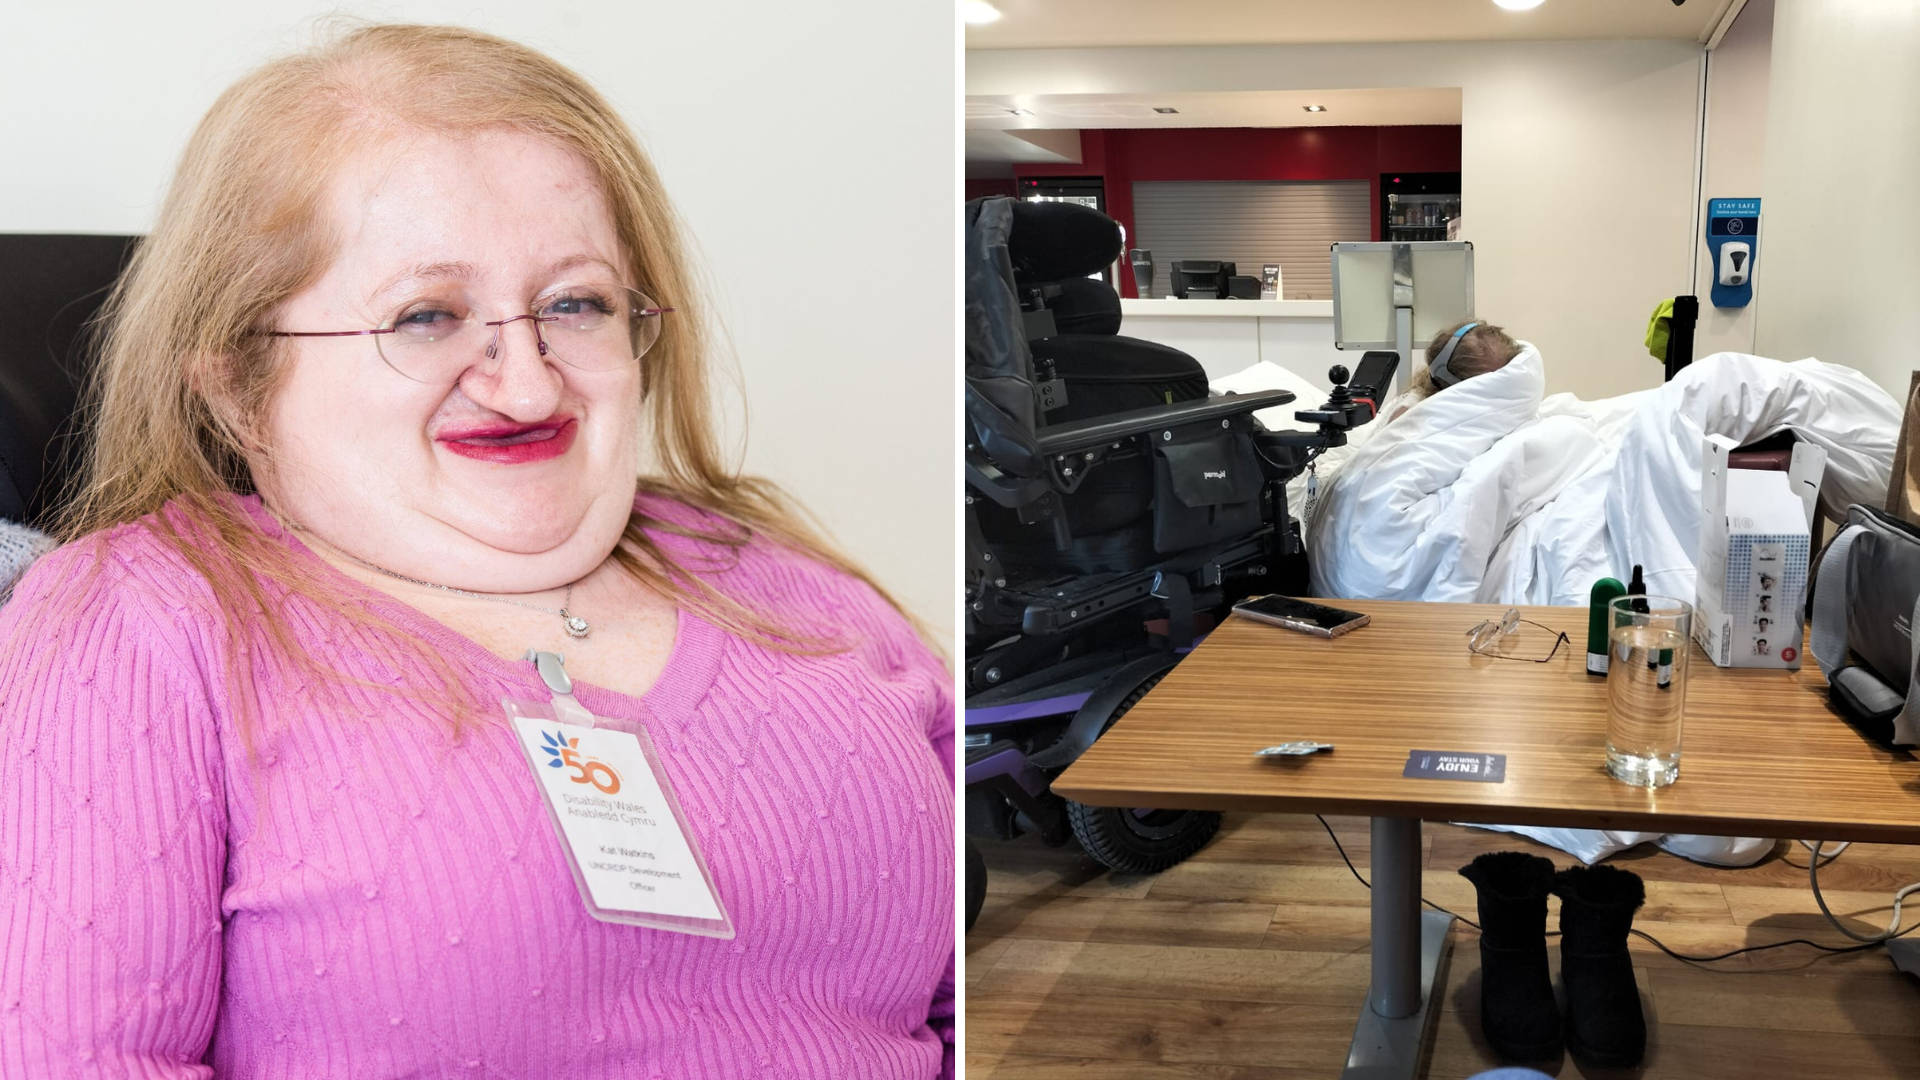 Disabled Woman Forced To Sleep In Travelodge Dining Area After Room She Booked Was ‘Out Of Order’